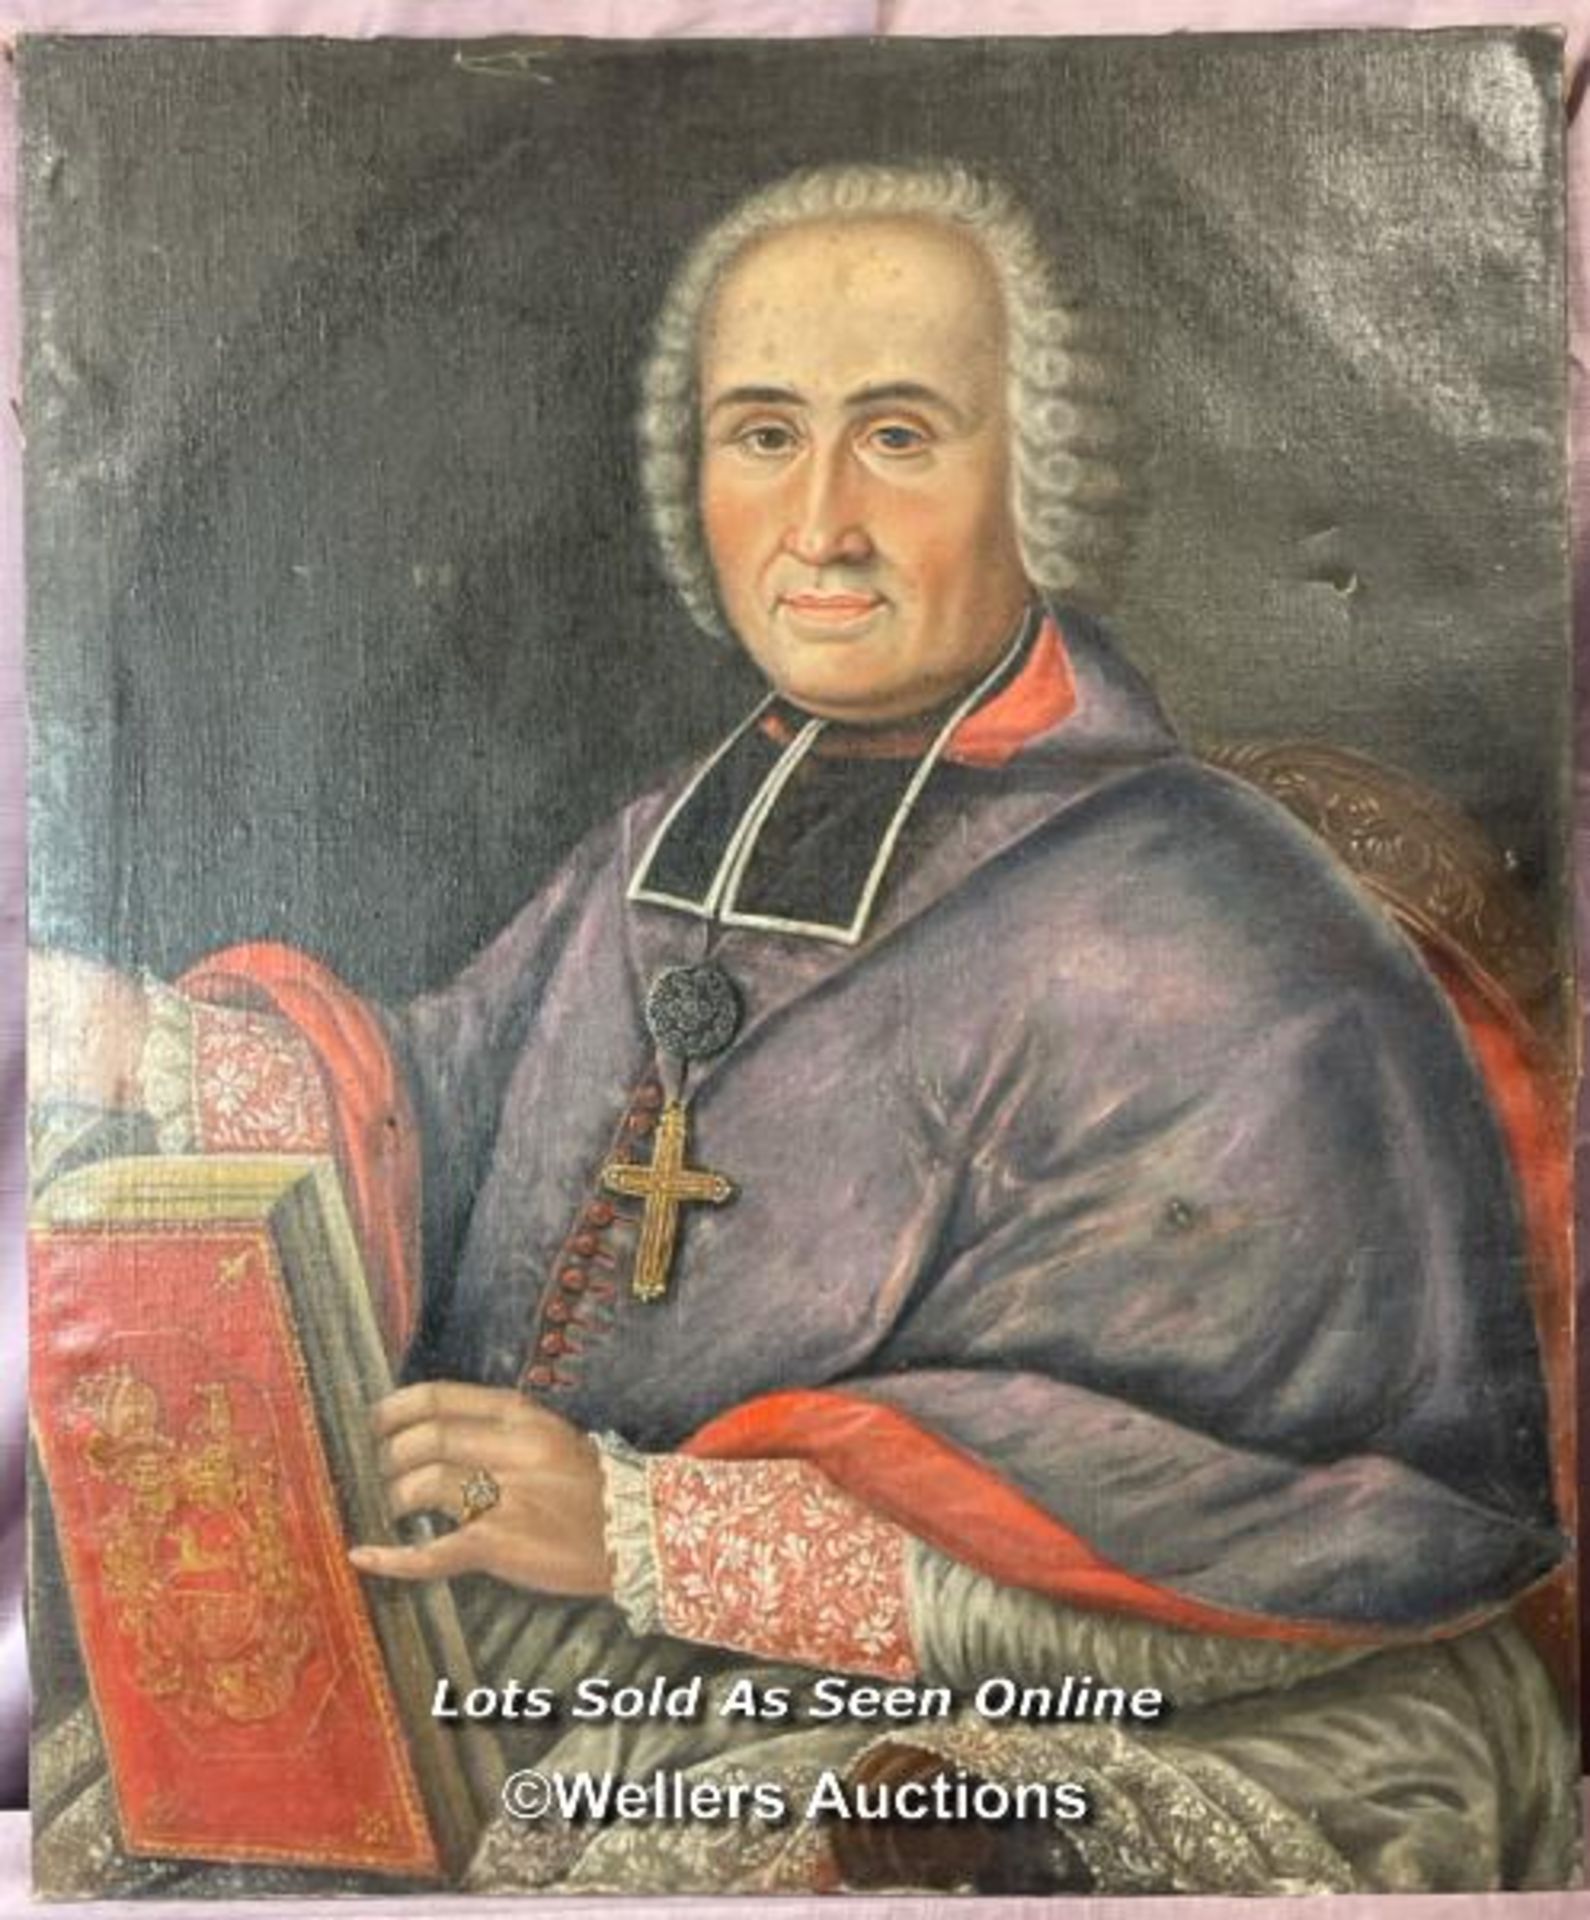 OIL ON CANVAS PORTRAIT OF A CLERGY MAN FROM FLORENCE, UNSIGNED, 68 X 82CM (SOME MINOR DAMAGE - SEE